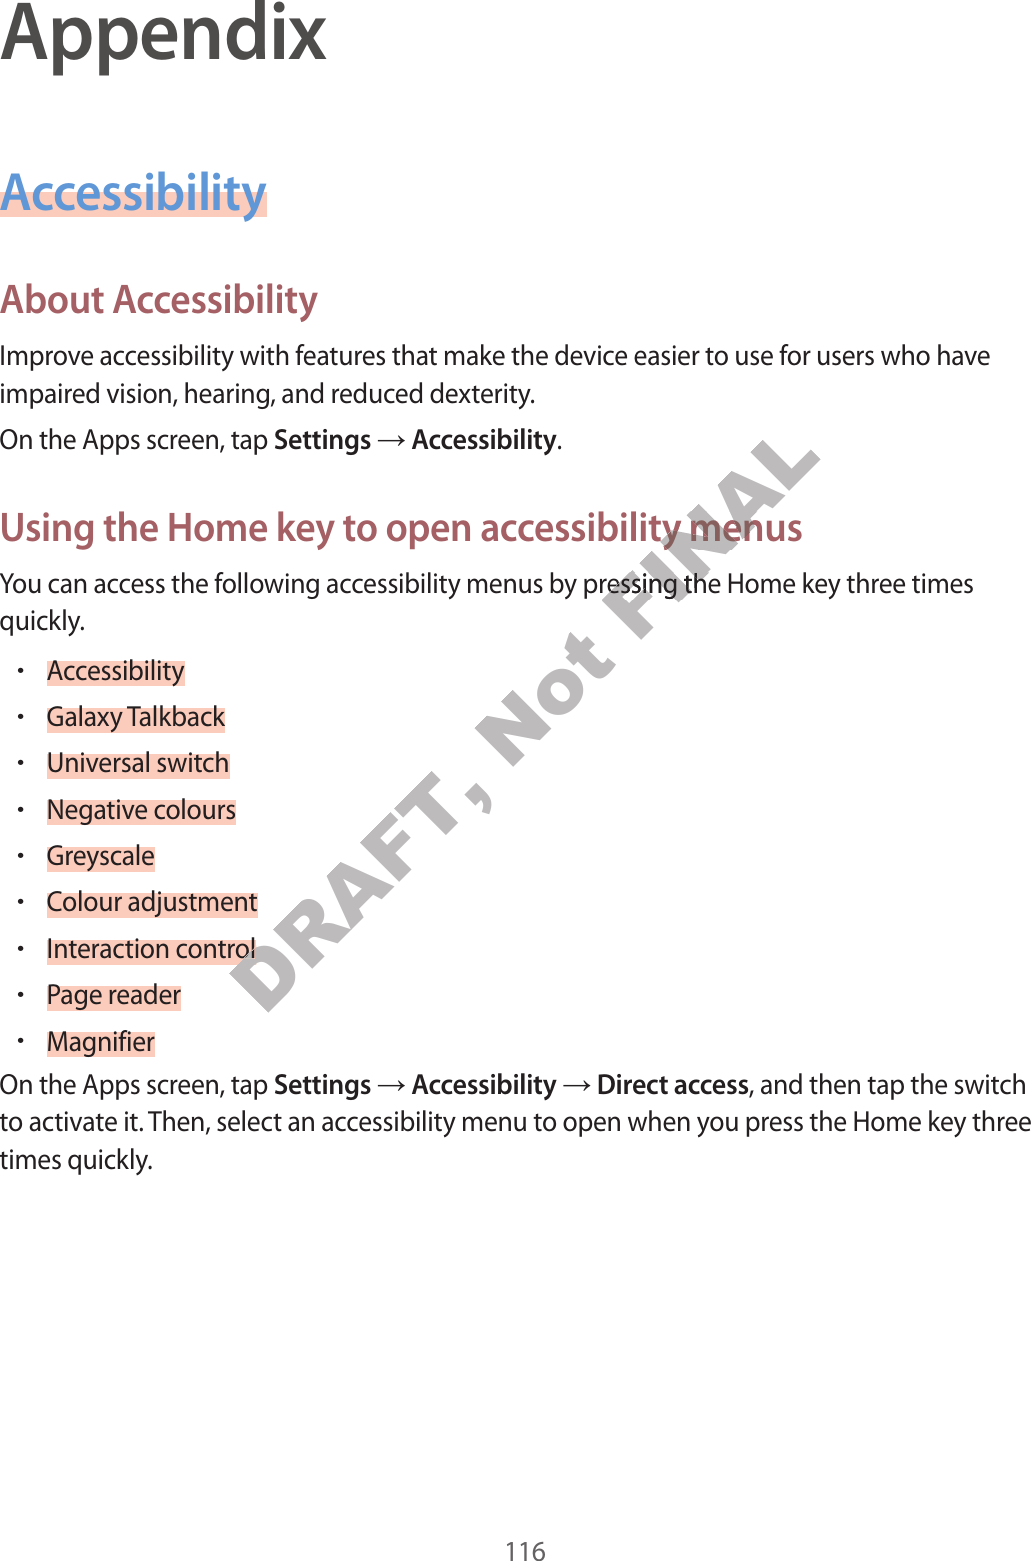 116AppendixAccessibilityAbout A c c essibilityImprove ac c essibility with featur es tha t make the device easier t o use f or users who ha v e impaired vision, hearing , and r educed de xterity.On the Apps screen, tap Settings  Accessibility.Using the Home k ey t o open ac c essibility menusYou can access the following ac cessibility menus by pr essing the Home key thr ee times quickly.•Accessibility•Galaxy T alkback•Universal switch•Negative c olours•Greyscale•Colour adjustment•Interaction control•P age r eader•MagnifierOn the Apps screen, tap Settings  Accessibility  Direct access, and then tap the switch to activate it. Then, select an accessibility menu to open when y ou pr ess the Home key thr ee times quickly .DRAFT, DRAFT, DRAFT, Interaction controlDRAFT, Interaction controlInteraction controlNot FINALUsing the Home k ey t o open ac c essibility menusFINALUsing the Home k ey t o open ac c essibility menusYou can access the following ac cessibility menus by pr essing the Home key thr ee times FINALYou can access the following ac cessibility menus by pr essing the Home key thr ee times 